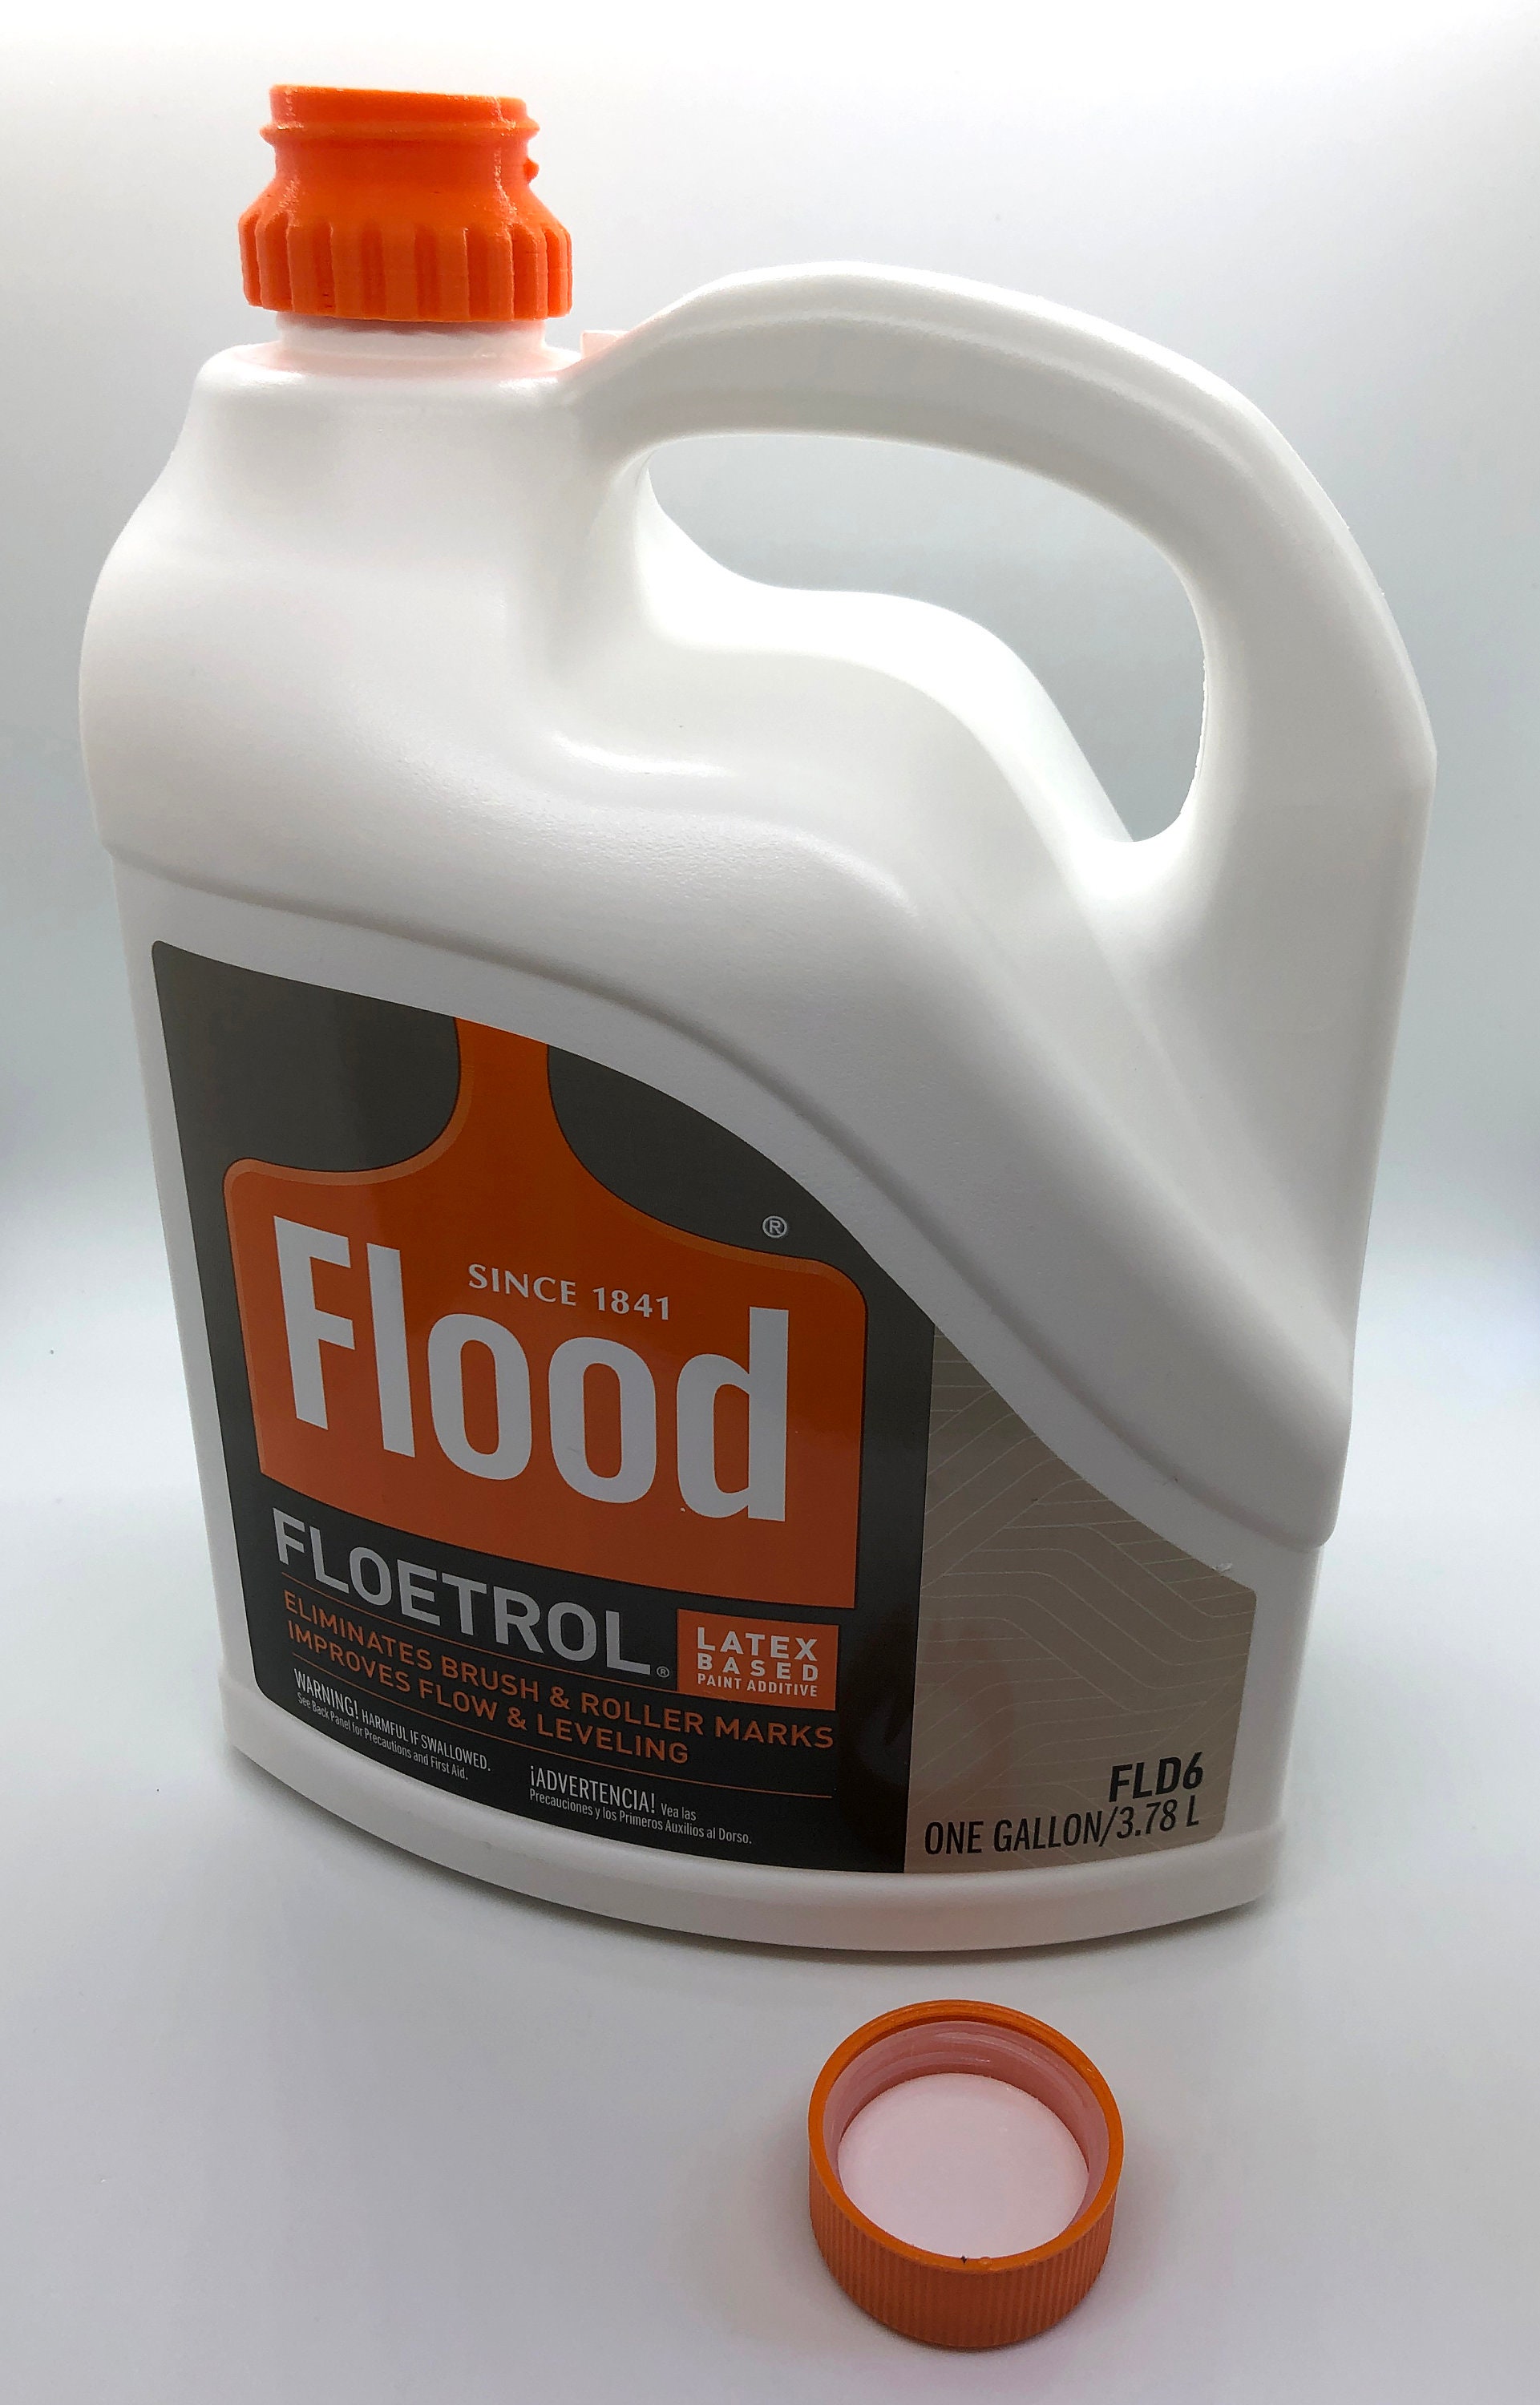 Floetrol-flood Filter for Paint Pouring/ Fluid Painting Fits Us-one Gallon  Floetrol-flood Container Filter Cap for Floetrol Jugus 